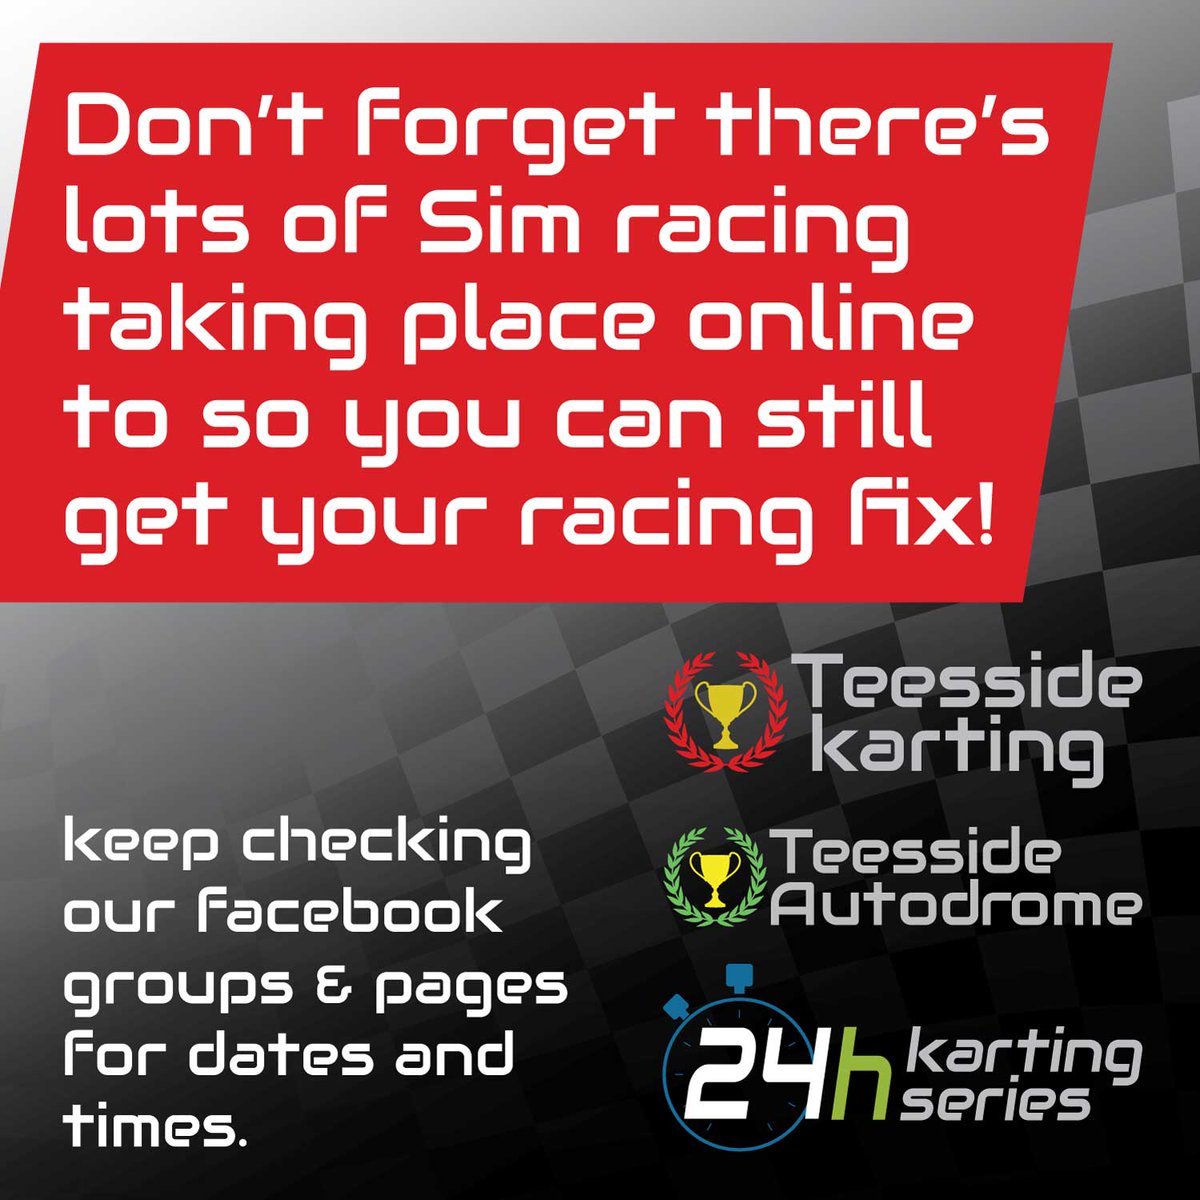 Need a racing fix? - Don't forget to check out the Sim Racing taking place online - join the Teesside Owner Driver Sprint Group where races are being shared every day! #SimRacing #TeessideKarting #StaySafe #StayAtHome